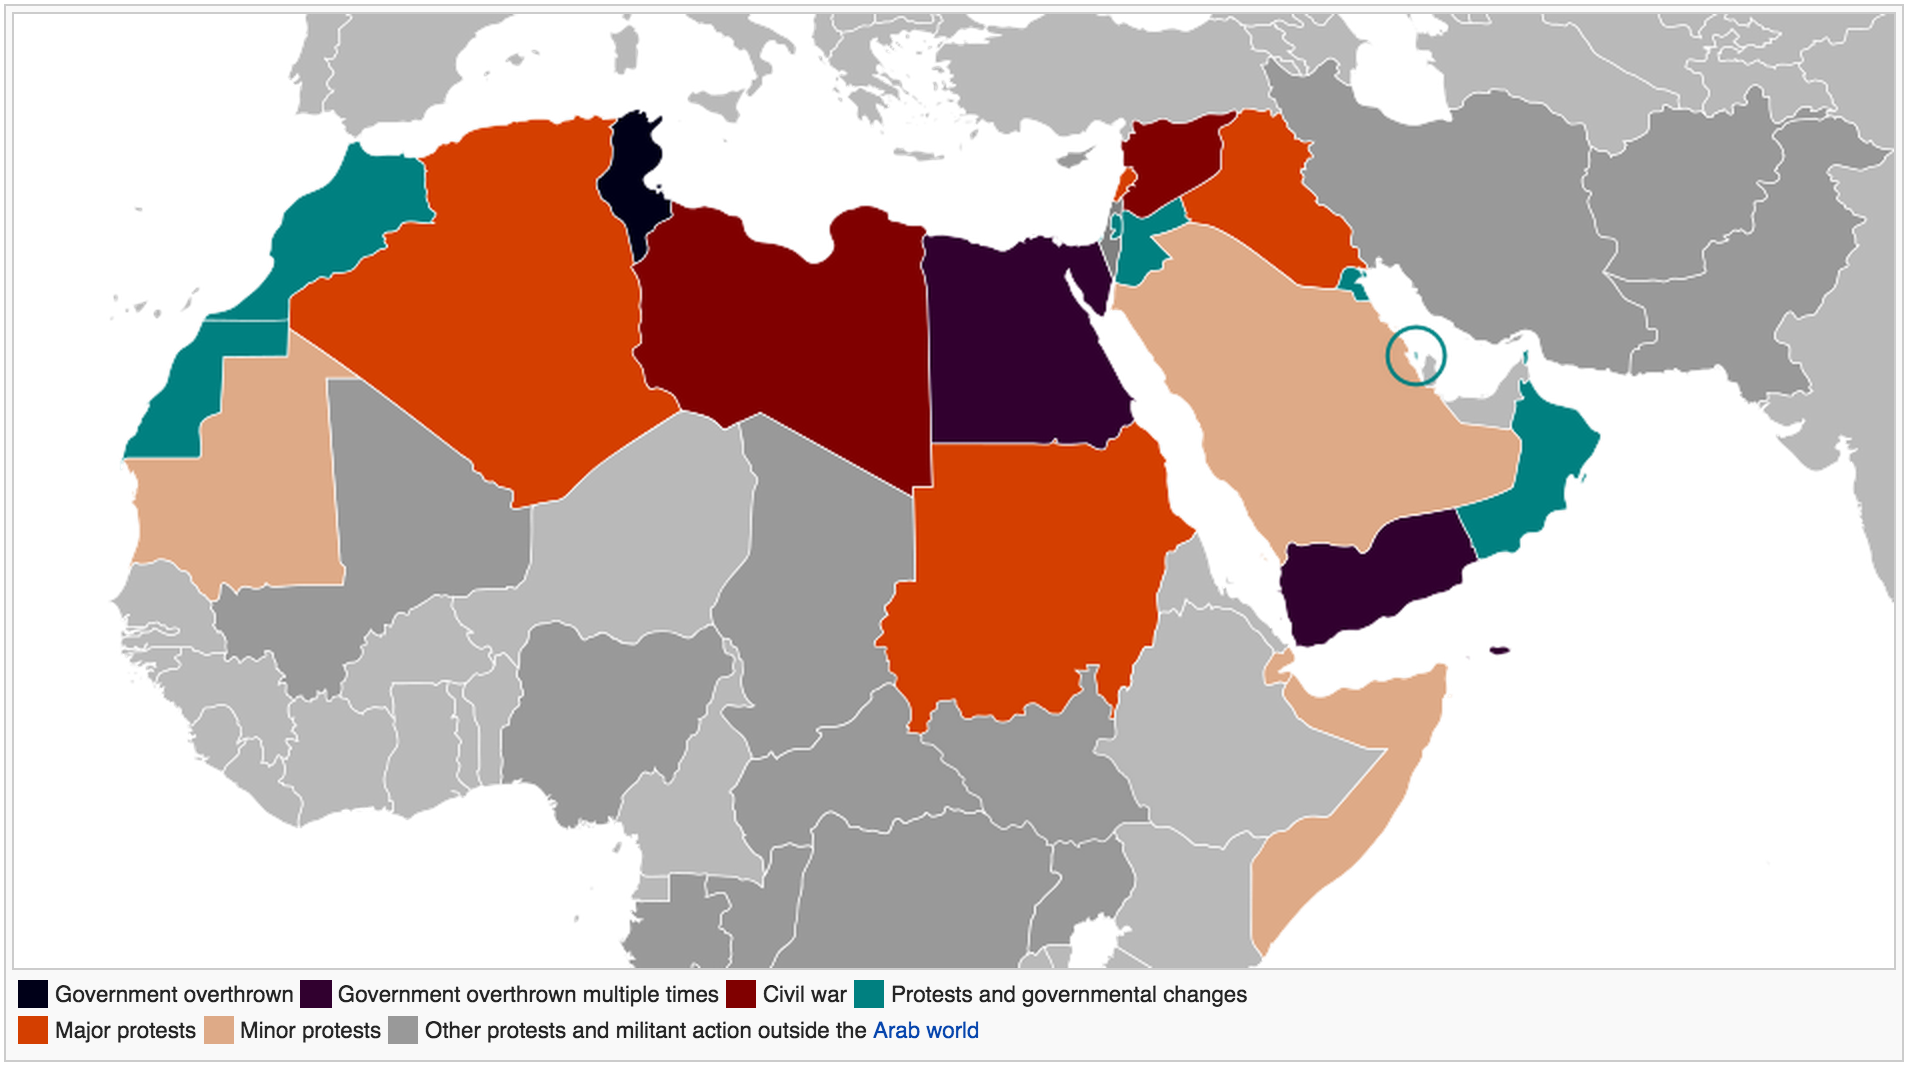 Status and outcomes of Arab Spring uprisings as of February 2015. Map by Ian Remsen for Wikimedia.